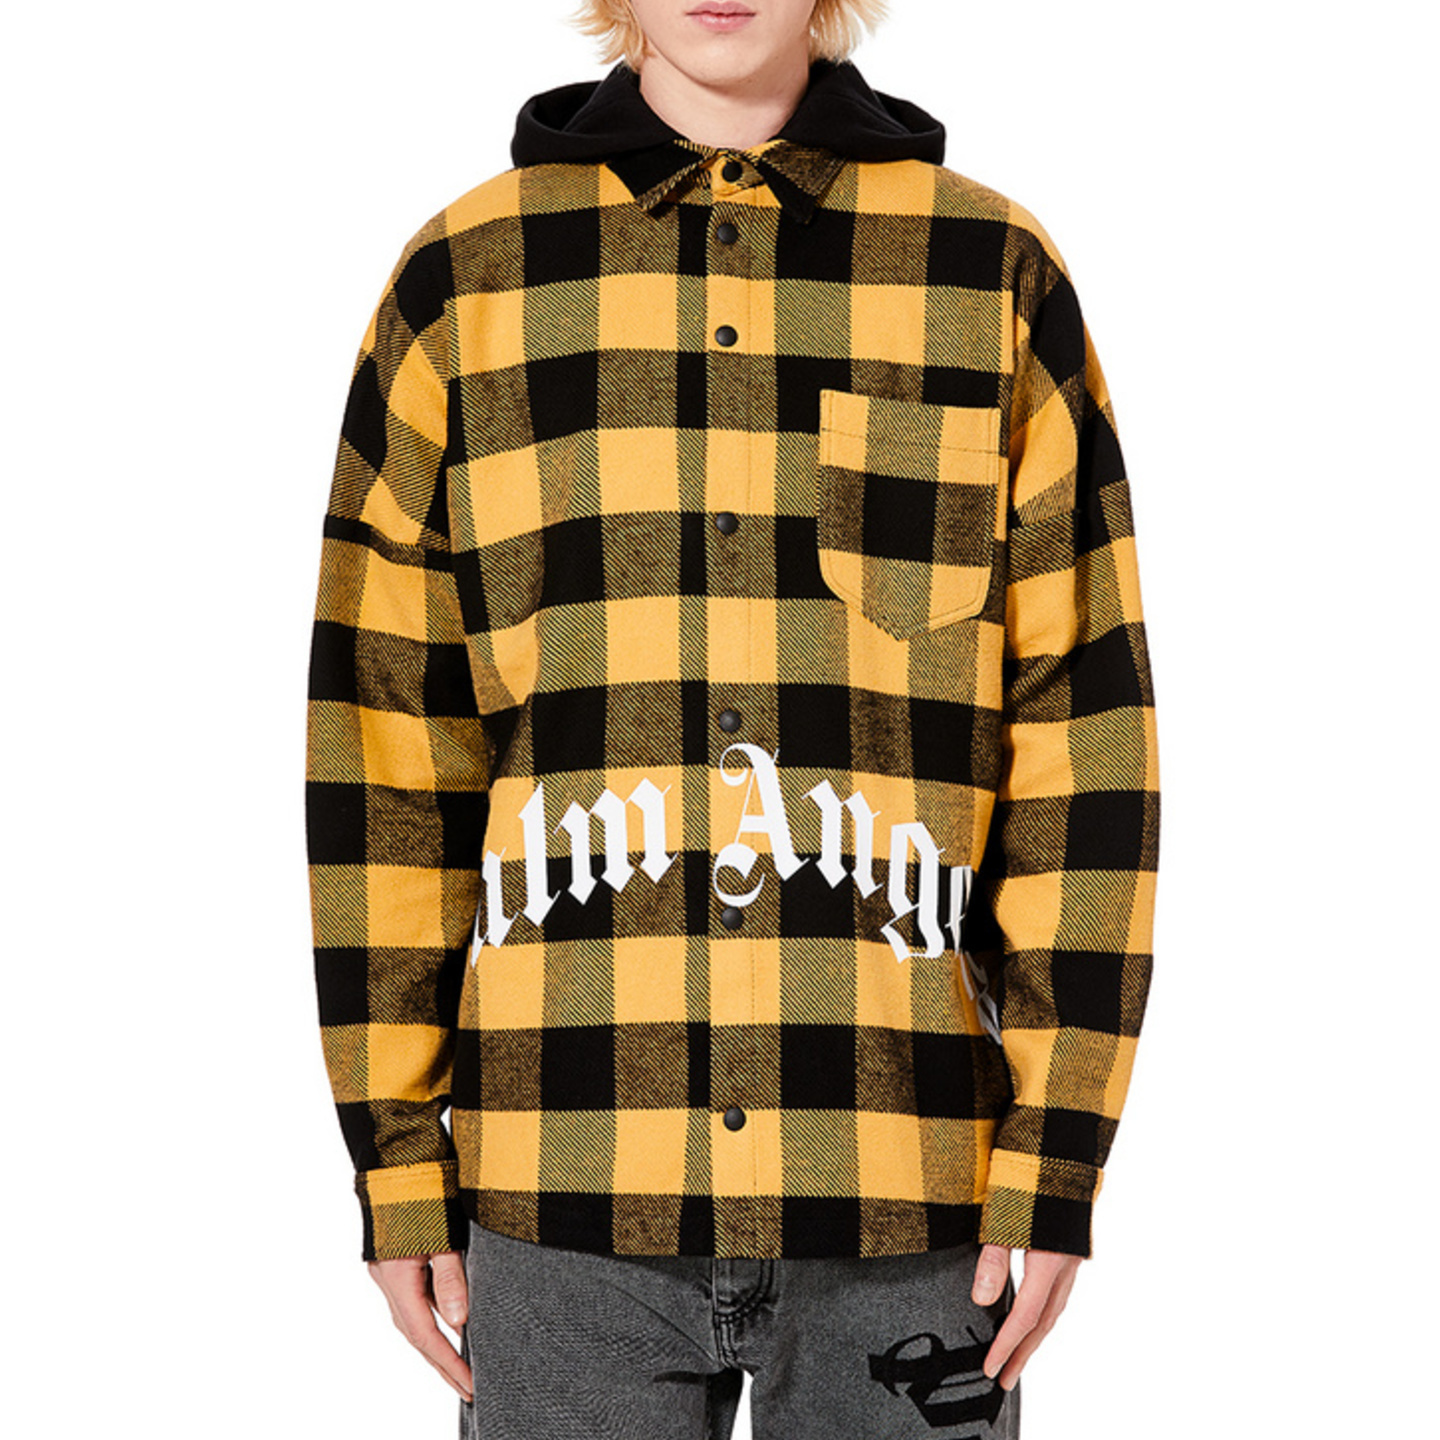 Palm Angels Checked Shirt